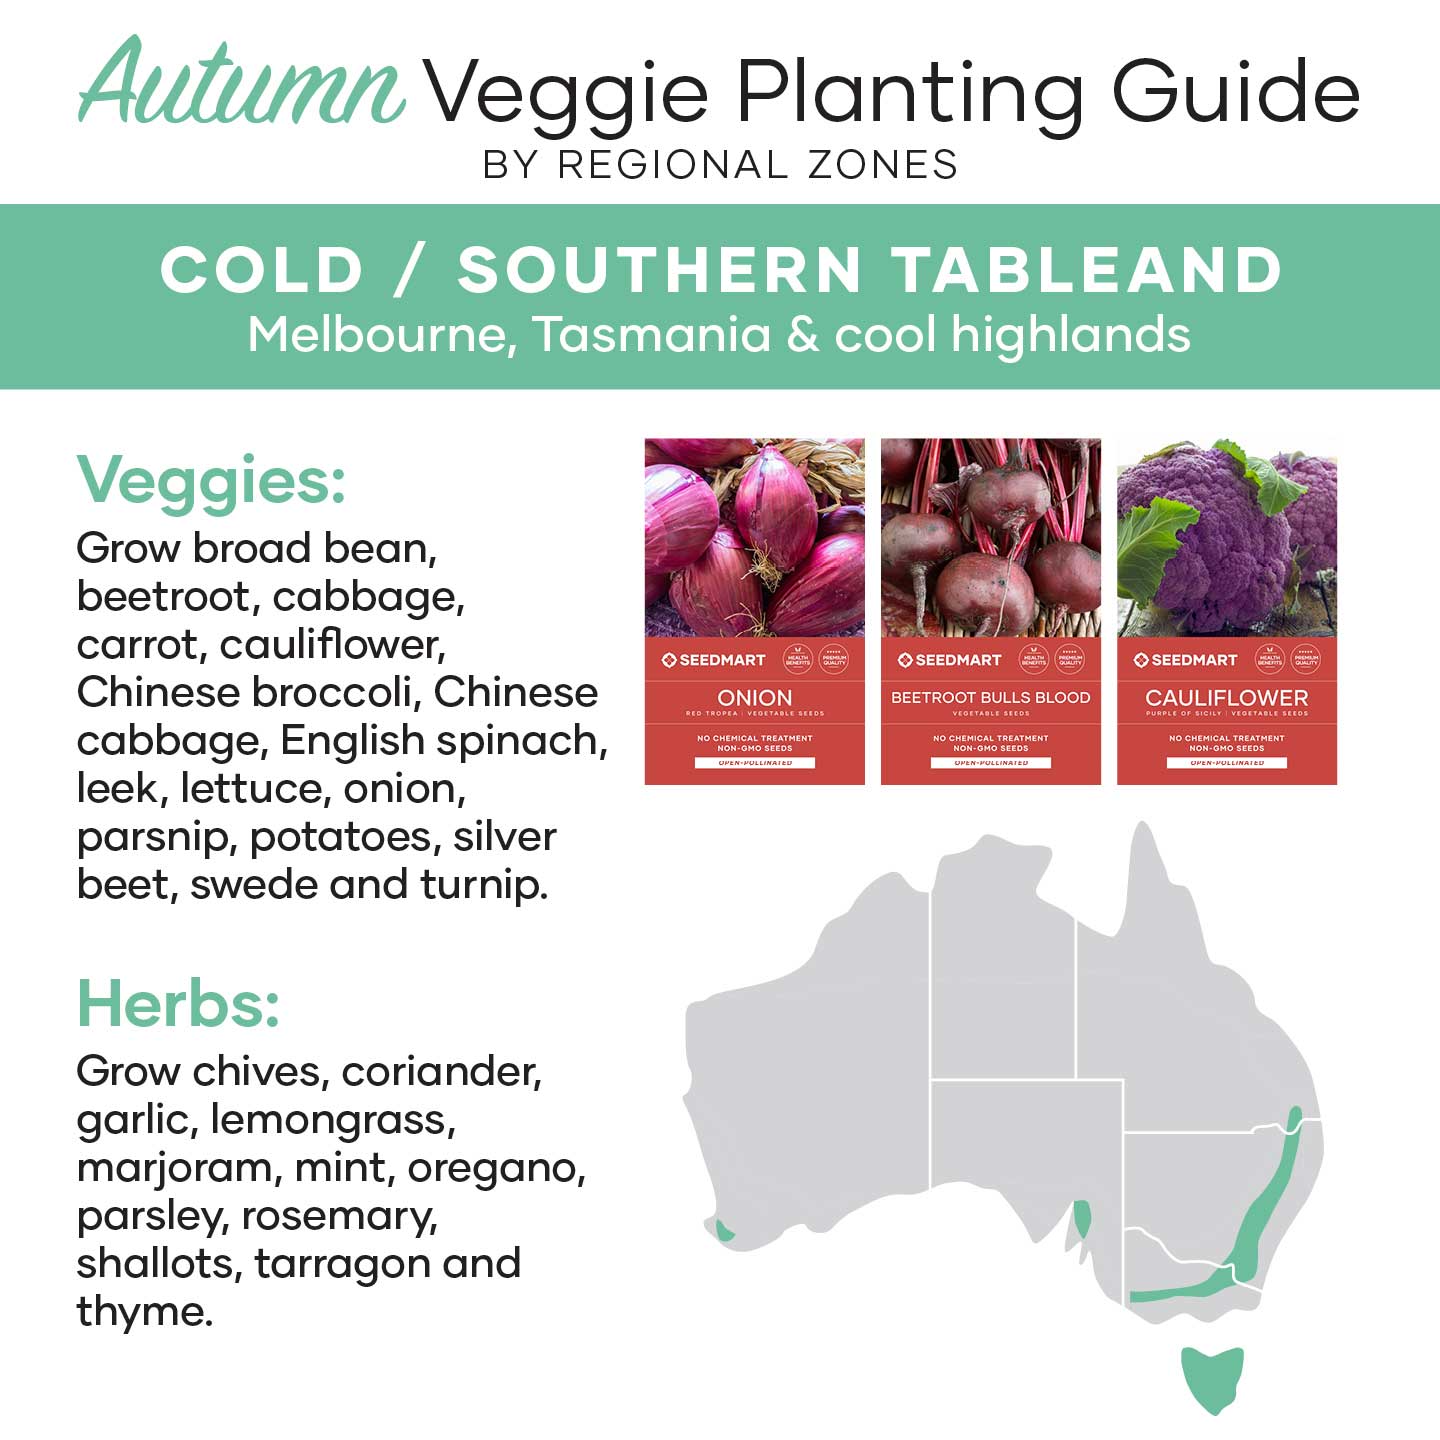 Which vegetables to plant in cold zones of Australia in Autumn